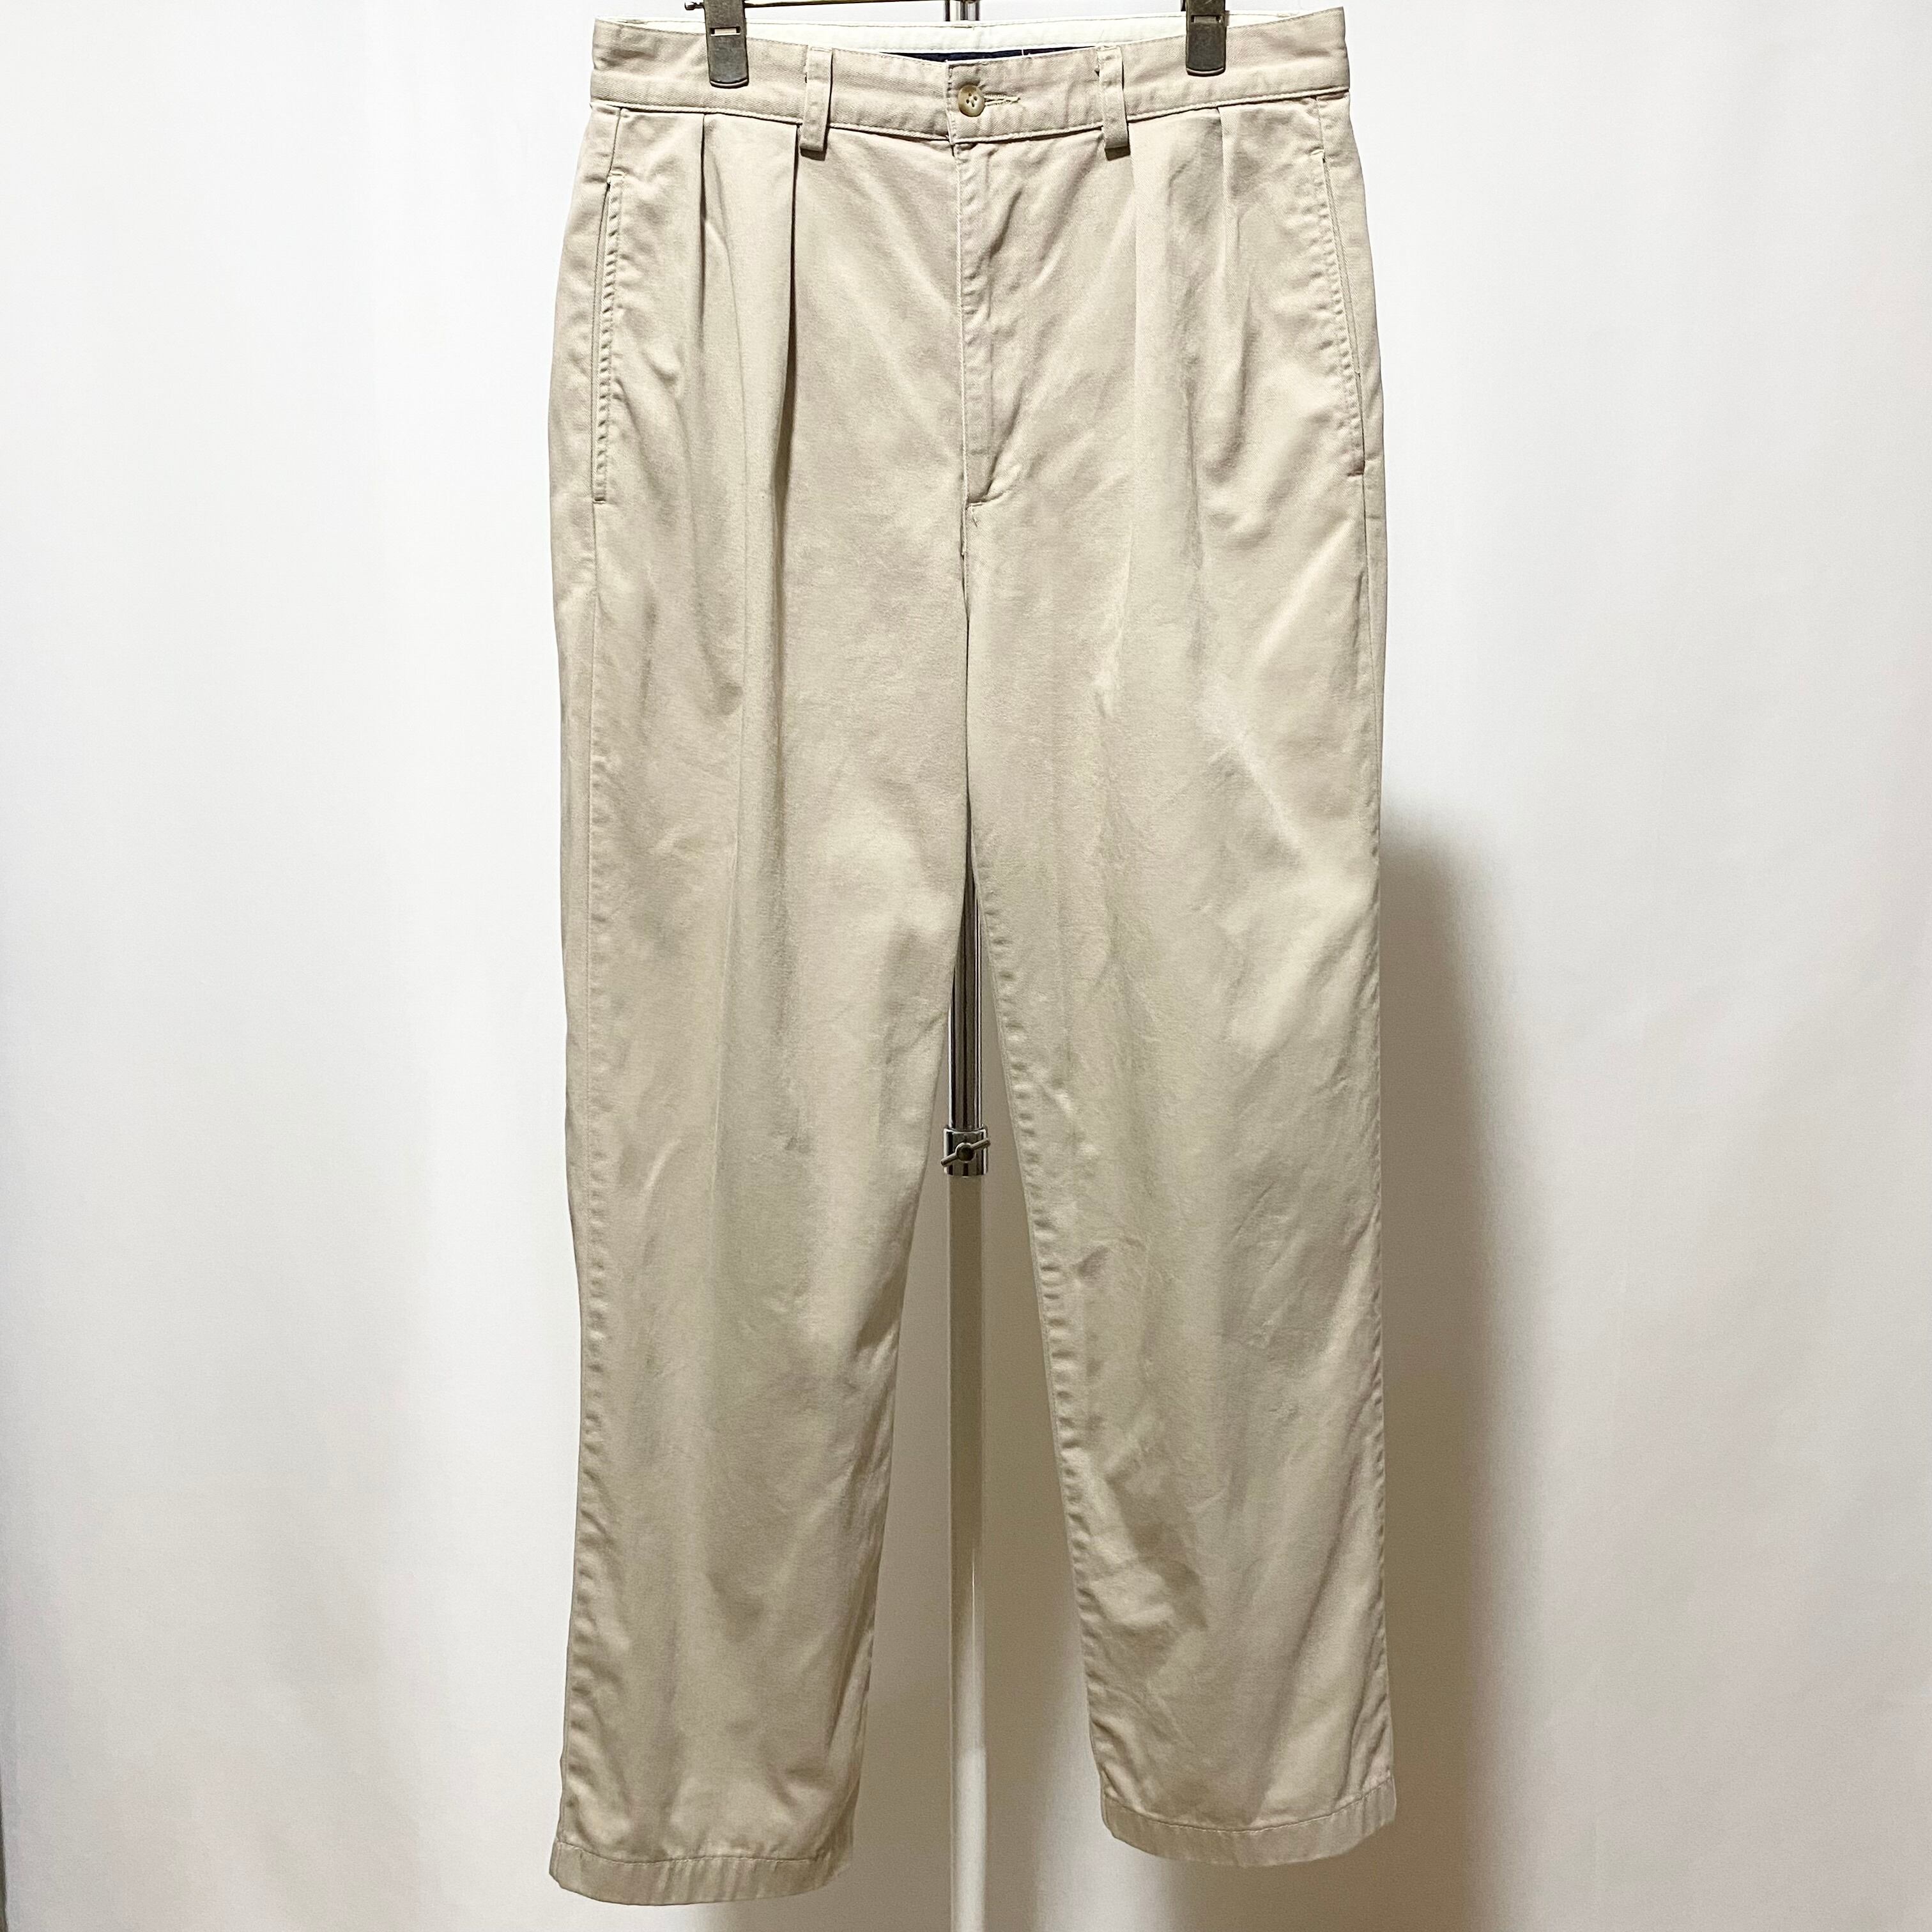 Polo by Ralph Lauren Andrew Pant 2Tuck Chino Beige Made in